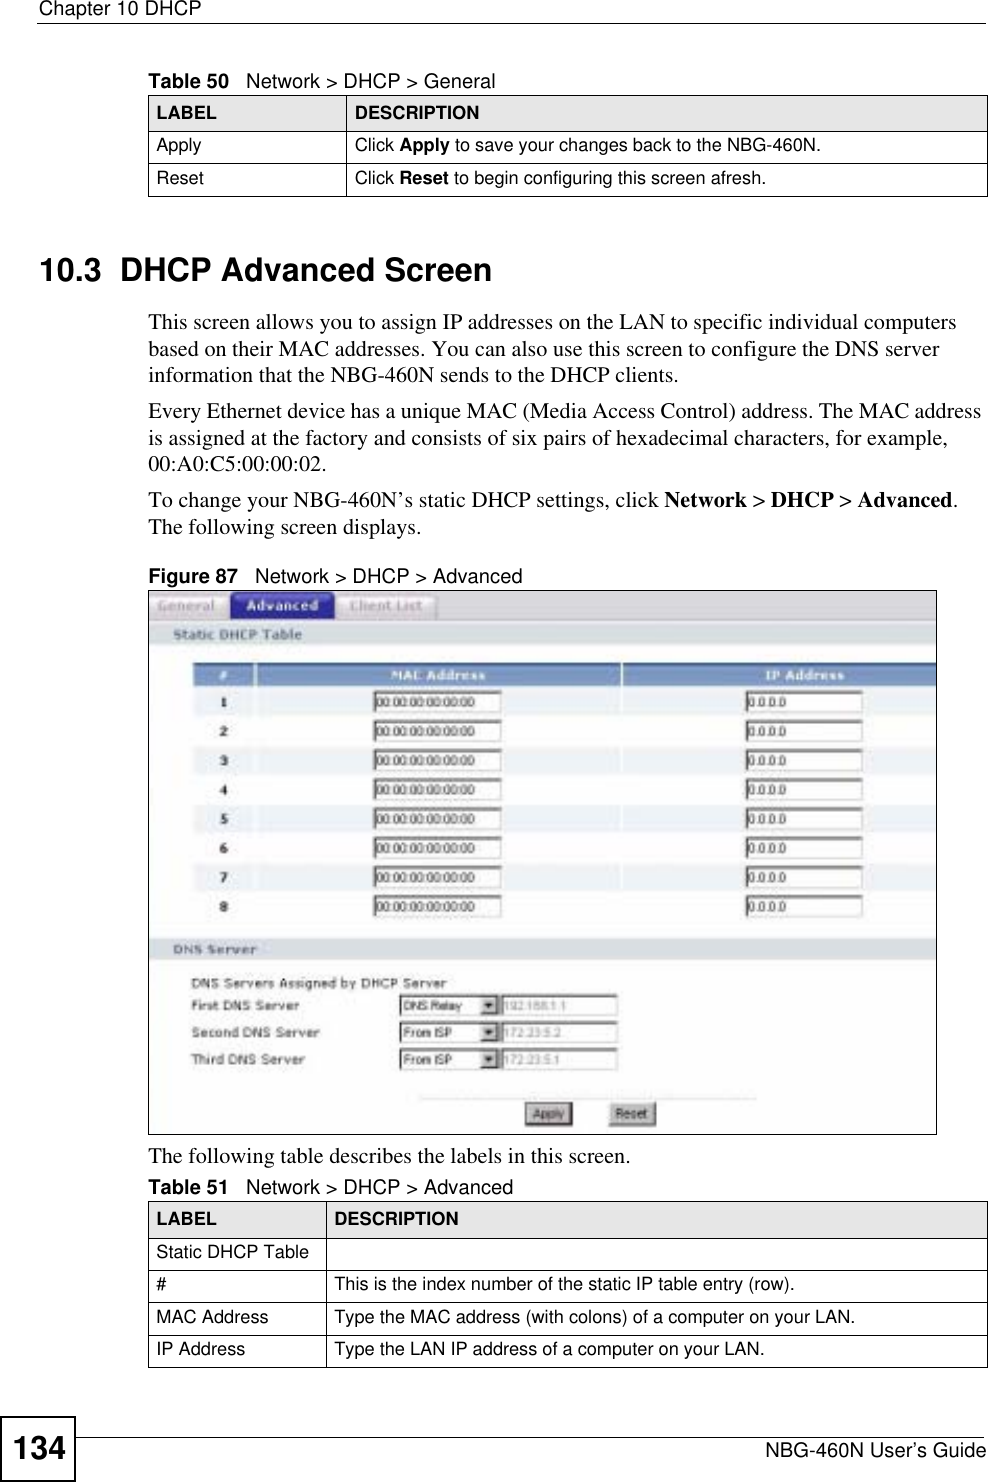 Chapter 10 DHCPNBG-460N User’s Guide13410.3  DHCP Advanced ScreenThis screen allows you to assign IP addresses on the LAN to specific individual computers based on their MAC addresses. You can also use this screen to configure the DNS server information that the NBG-460N sends to the DHCP clients.Every Ethernet device has a unique MAC (Media Access Control) address. The MAC address is assigned at the factory and consists of six pairs of hexadecimal characters, for example, 00:A0:C5:00:00:02.To change your NBG-460N’s static DHCP settings, click Network &gt; DHCP &gt; Advanced.The following screen displays.Figure 87   Network &gt; DHCP &gt; Advanced The following table describes the labels in this screen.Apply Click Apply to save your changes back to the NBG-460N.Reset Click Reset to begin configuring this screen afresh.Table 50   Network &gt; DHCP &gt; General LABEL DESCRIPTIONTable 51   Network &gt; DHCP &gt; AdvancedLABEL DESCRIPTIONStatic DHCP Table# This is the index number of the static IP table entry (row).MAC Address Type the MAC address (with colons) of a computer on your LAN.IP Address Type the LAN IP address of a computer on your LAN.